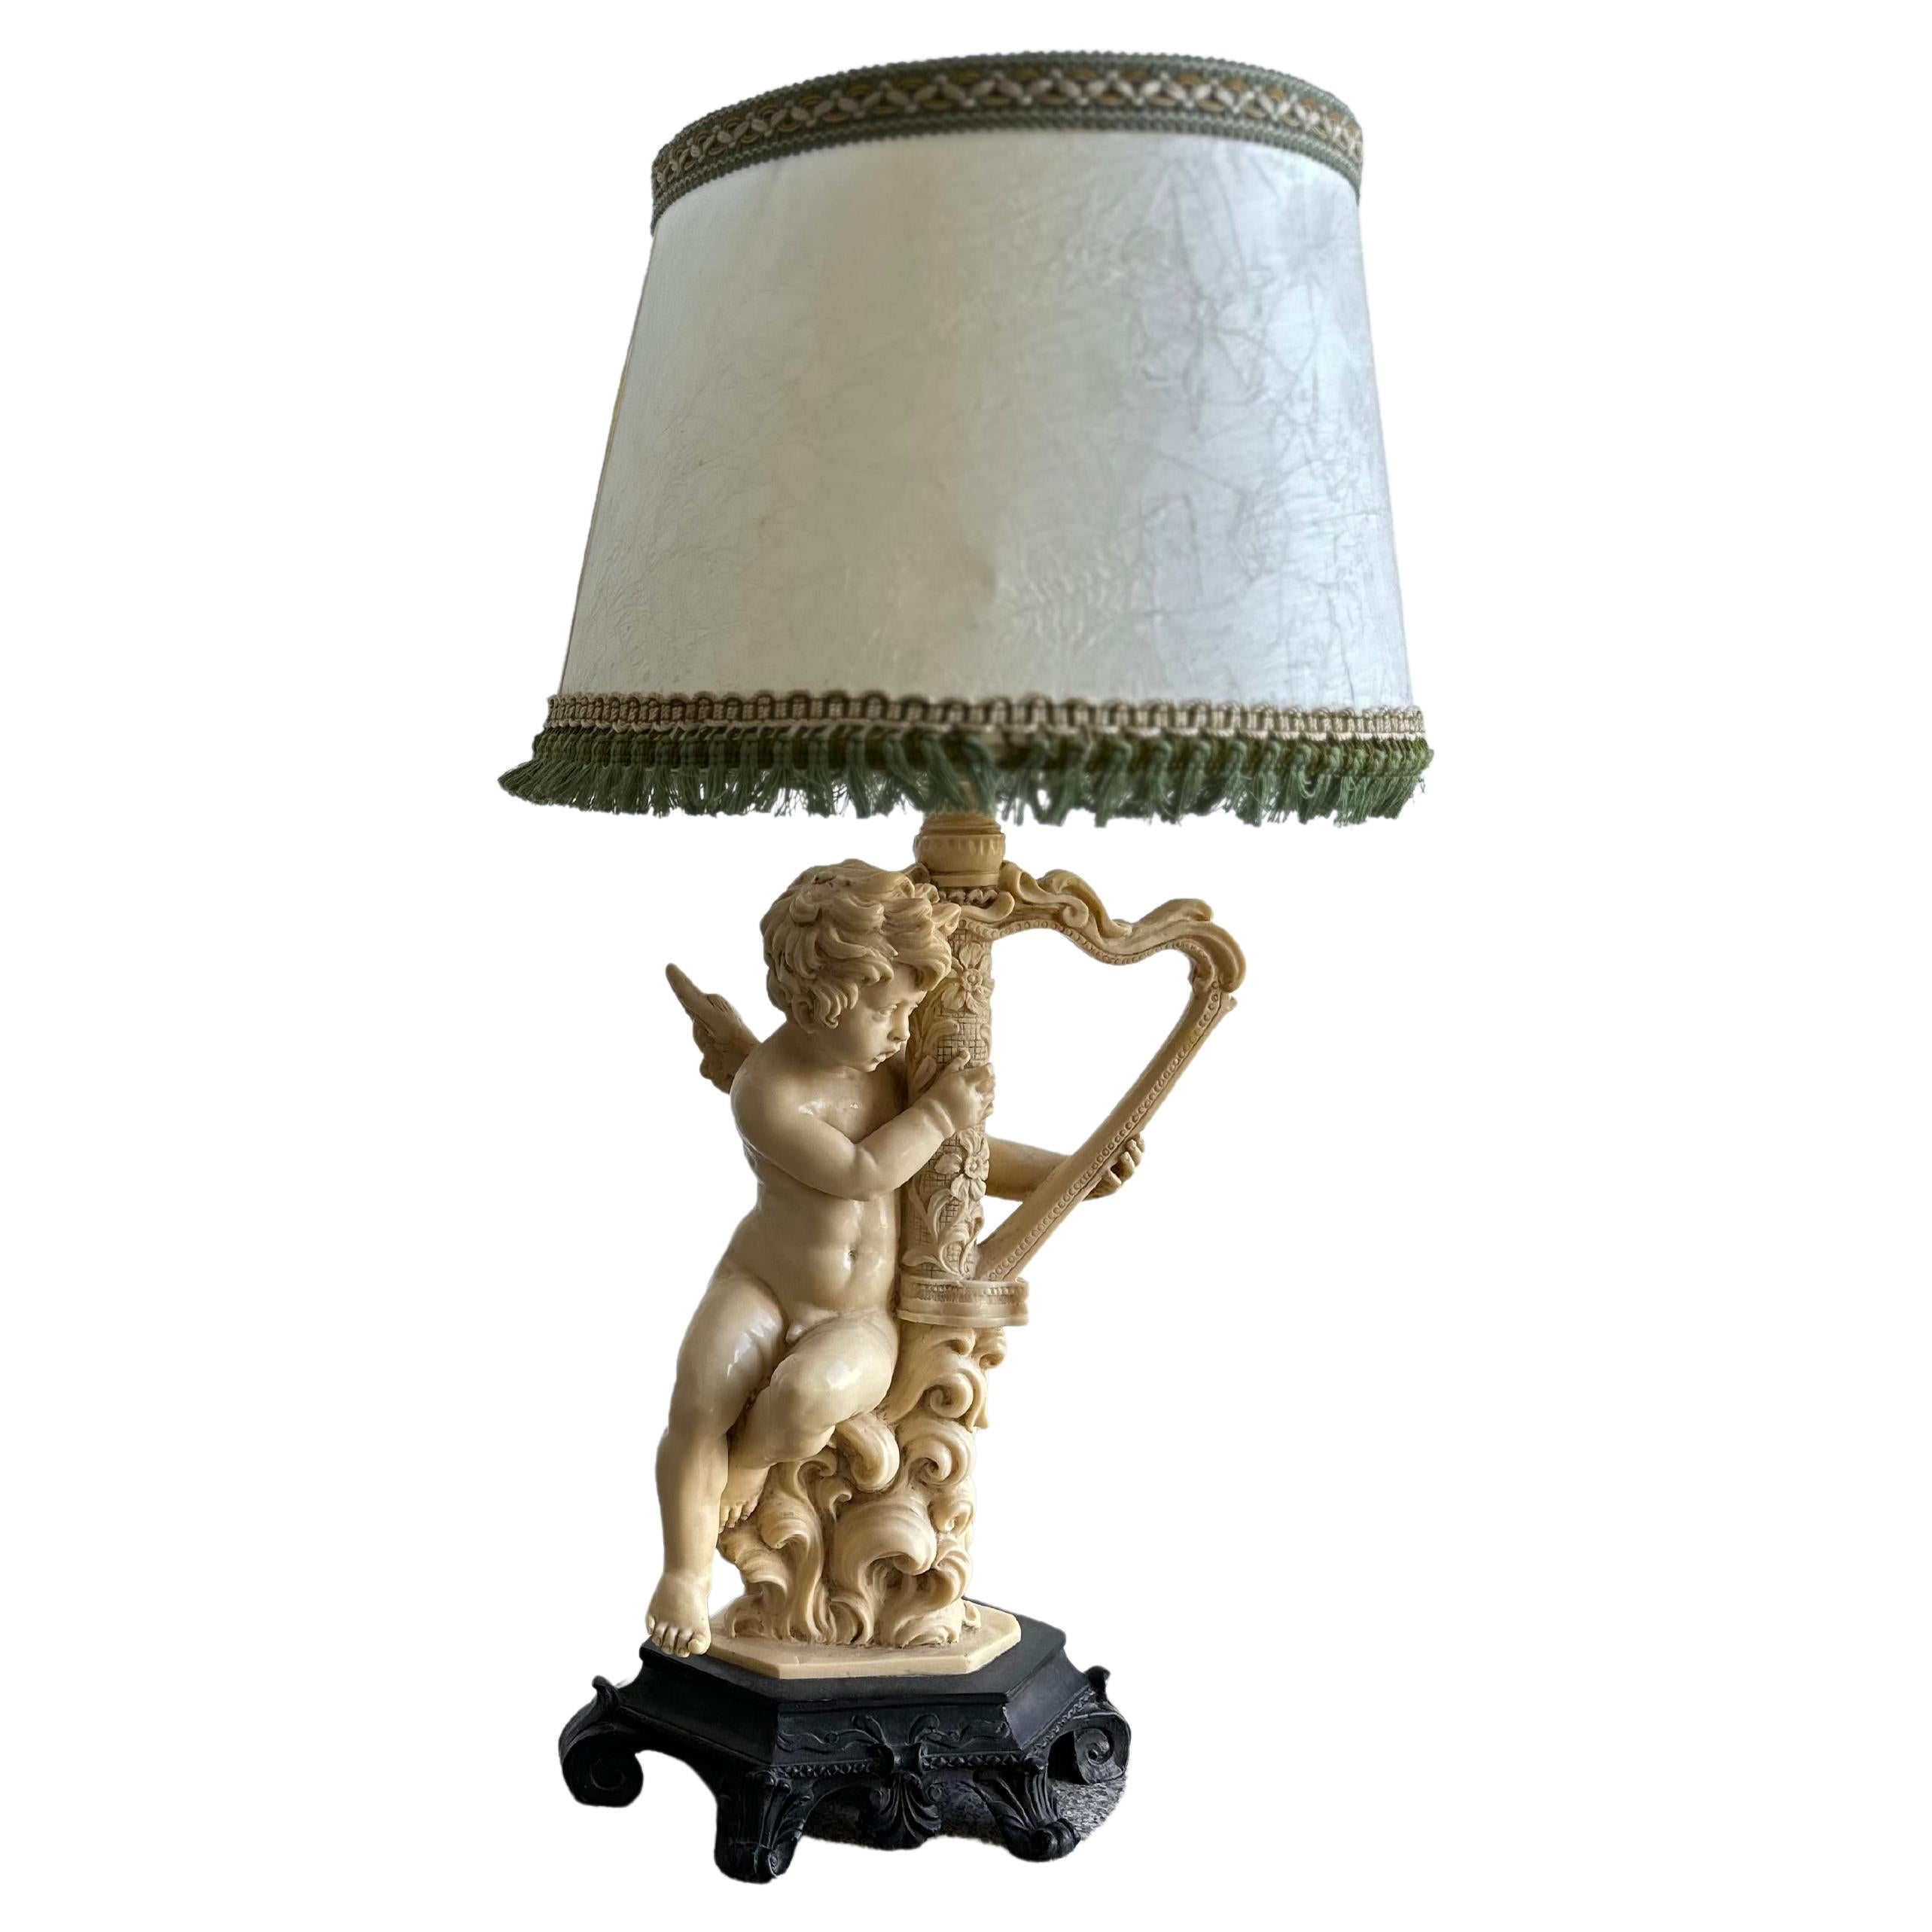 Italian Sculpture Table Lamp in Resin by Santini Tuscany For Sale